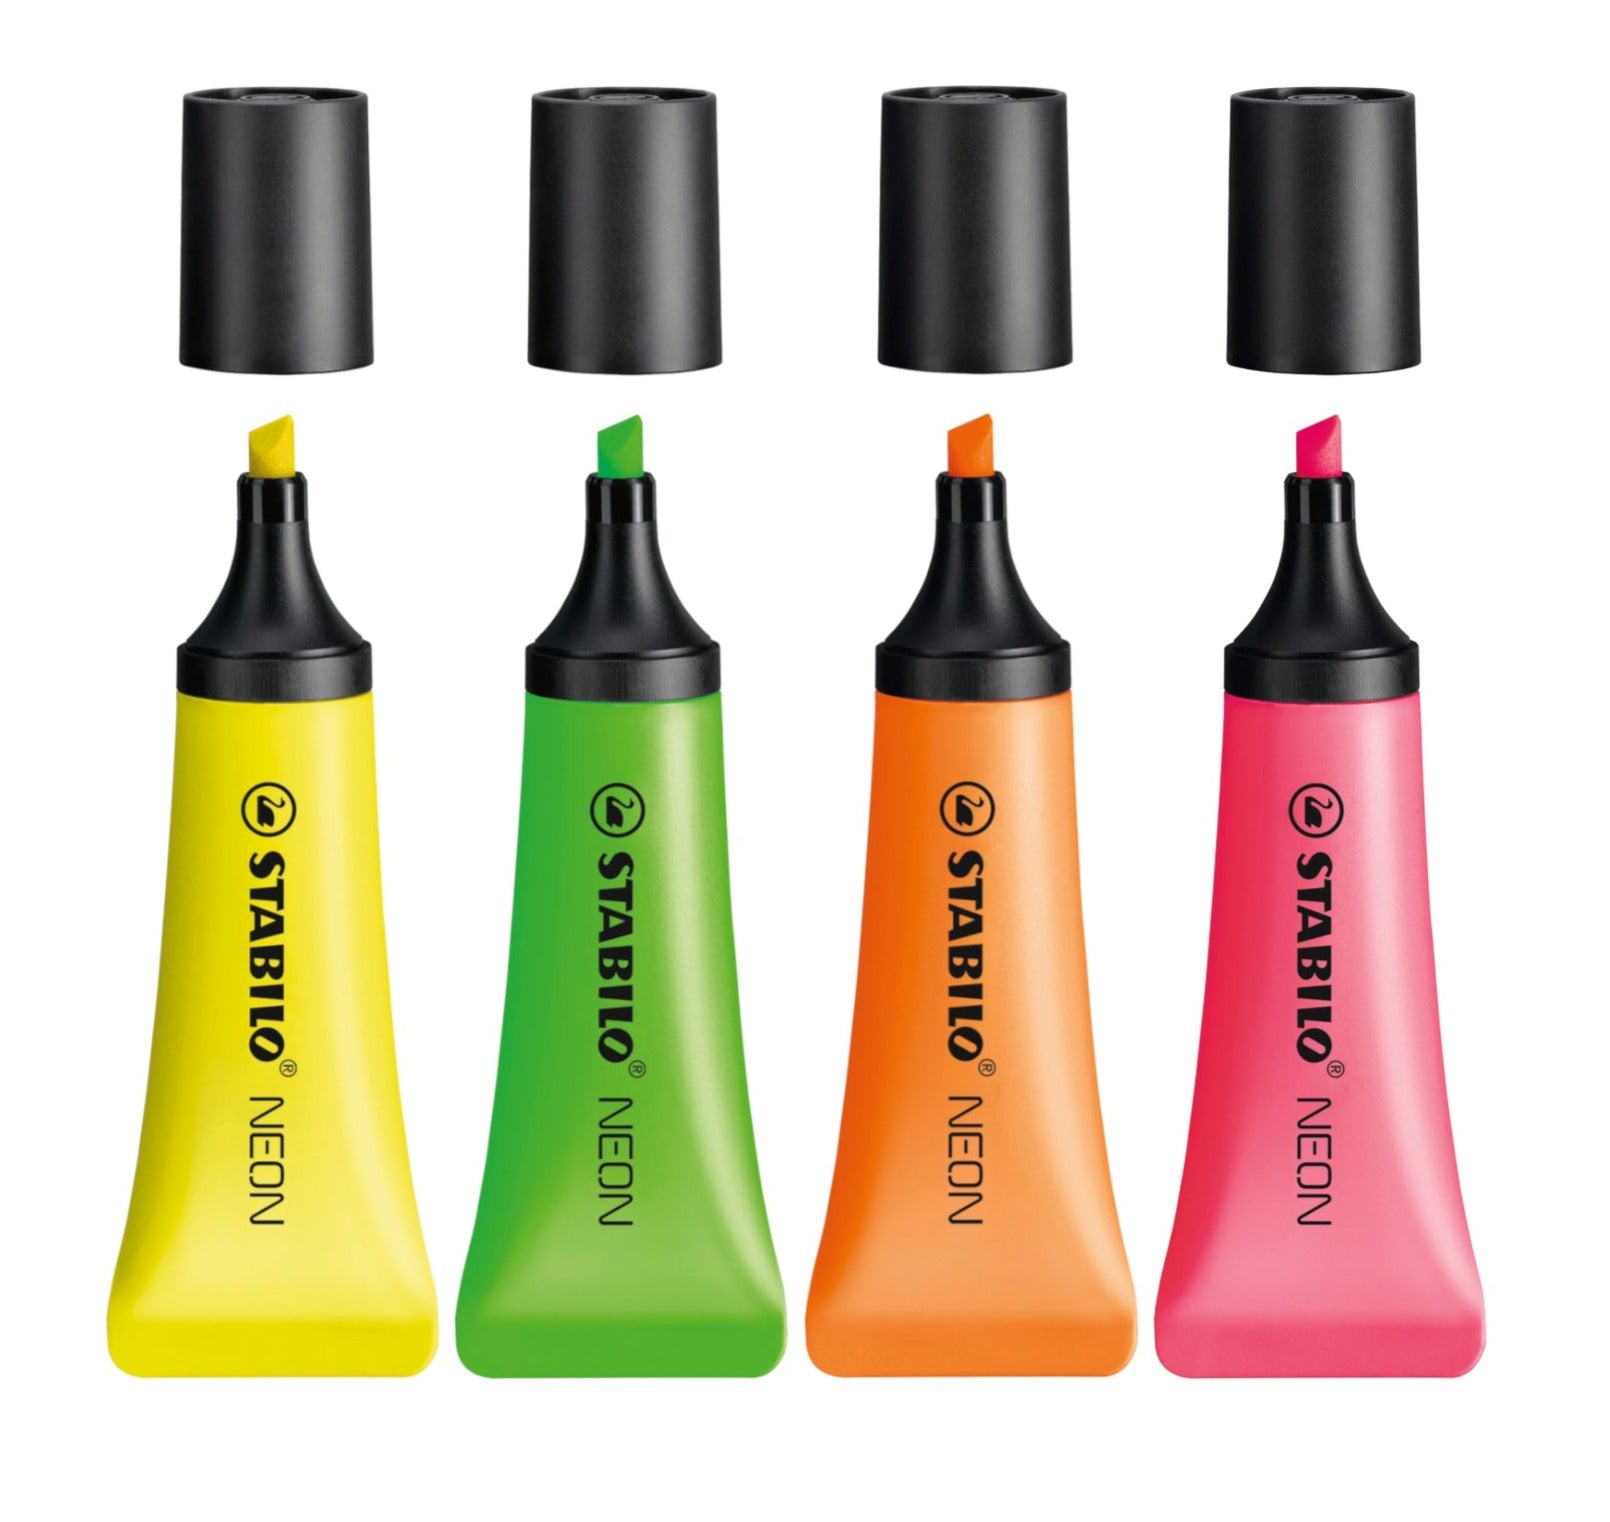 STABILO NEON Highlighters - Set of 4 colours - Schwan-STABILO -Most colourful Stationery Shop